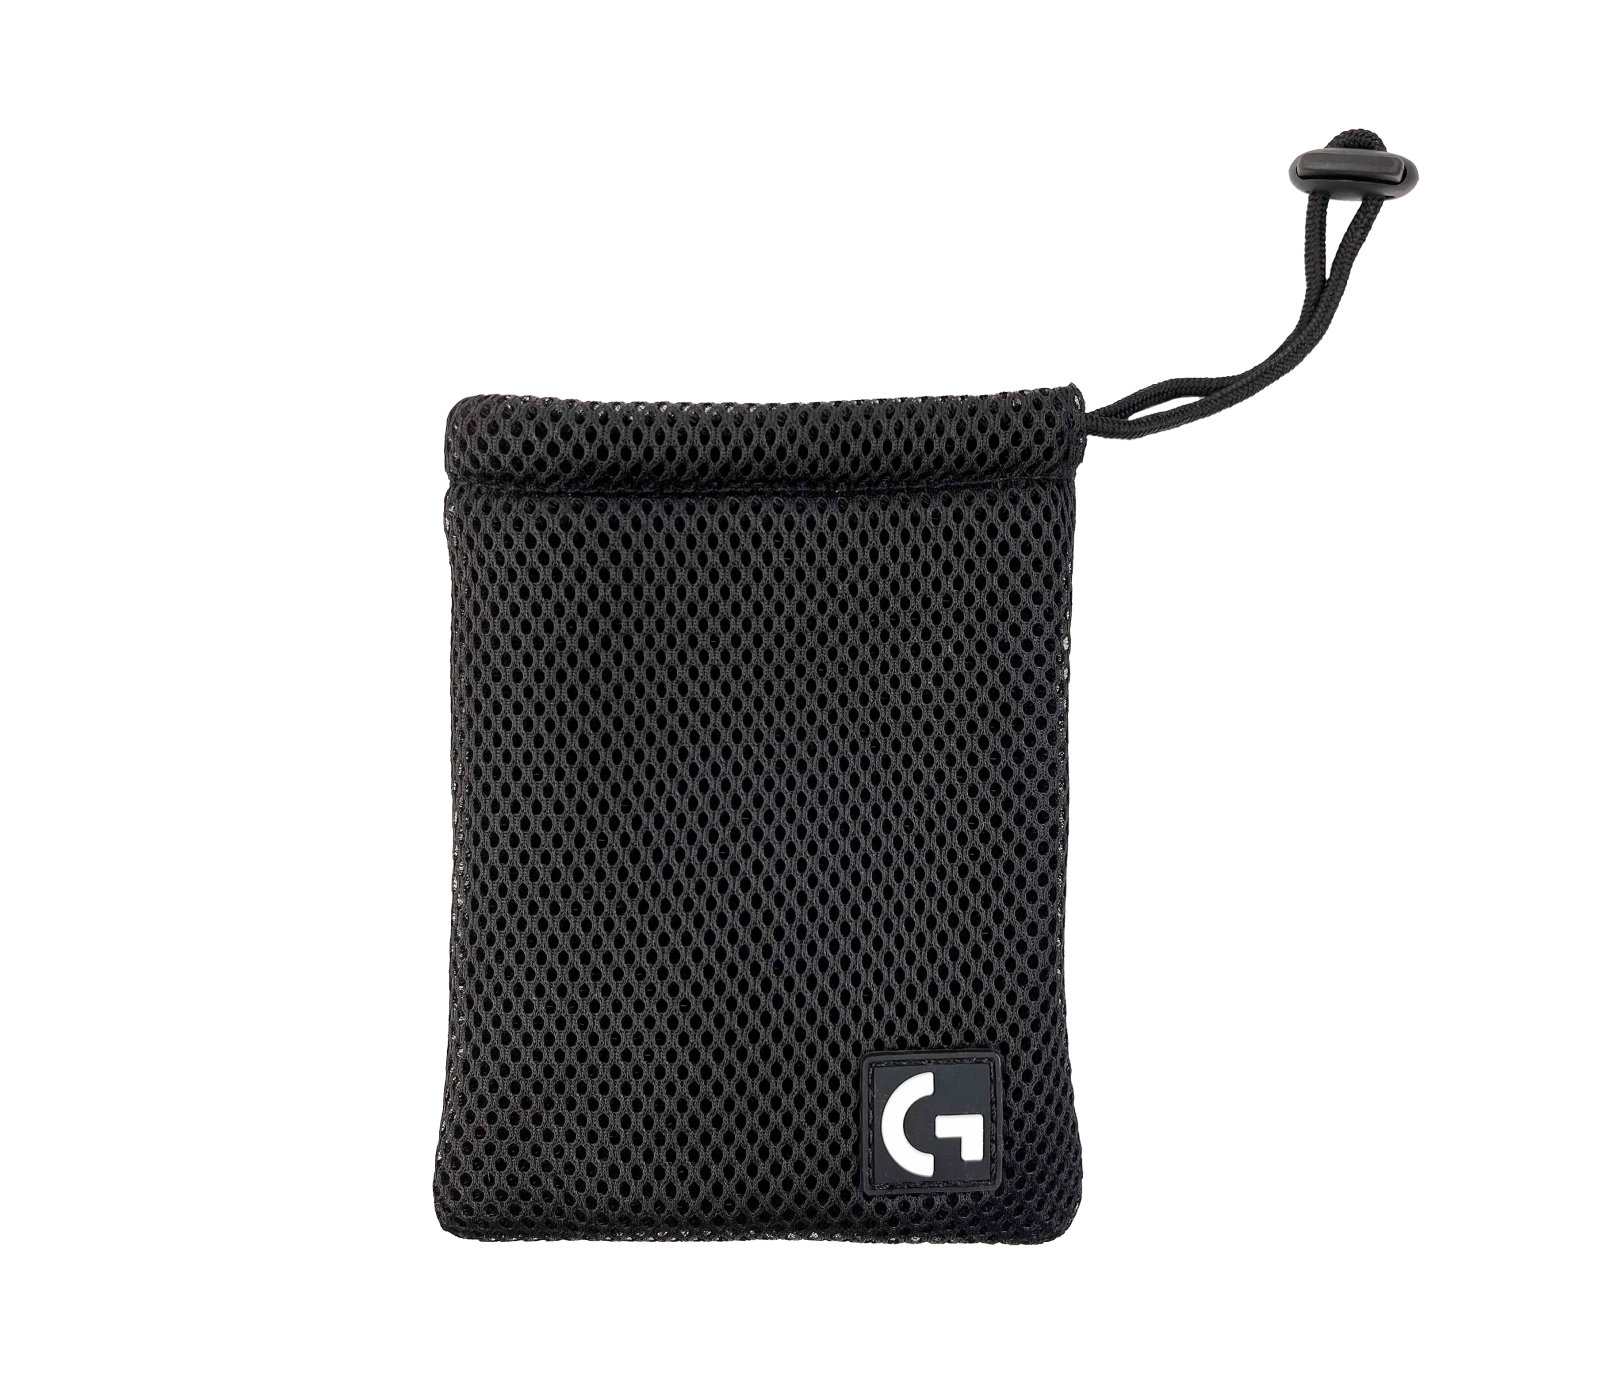 Logicool G Mouse Pouch